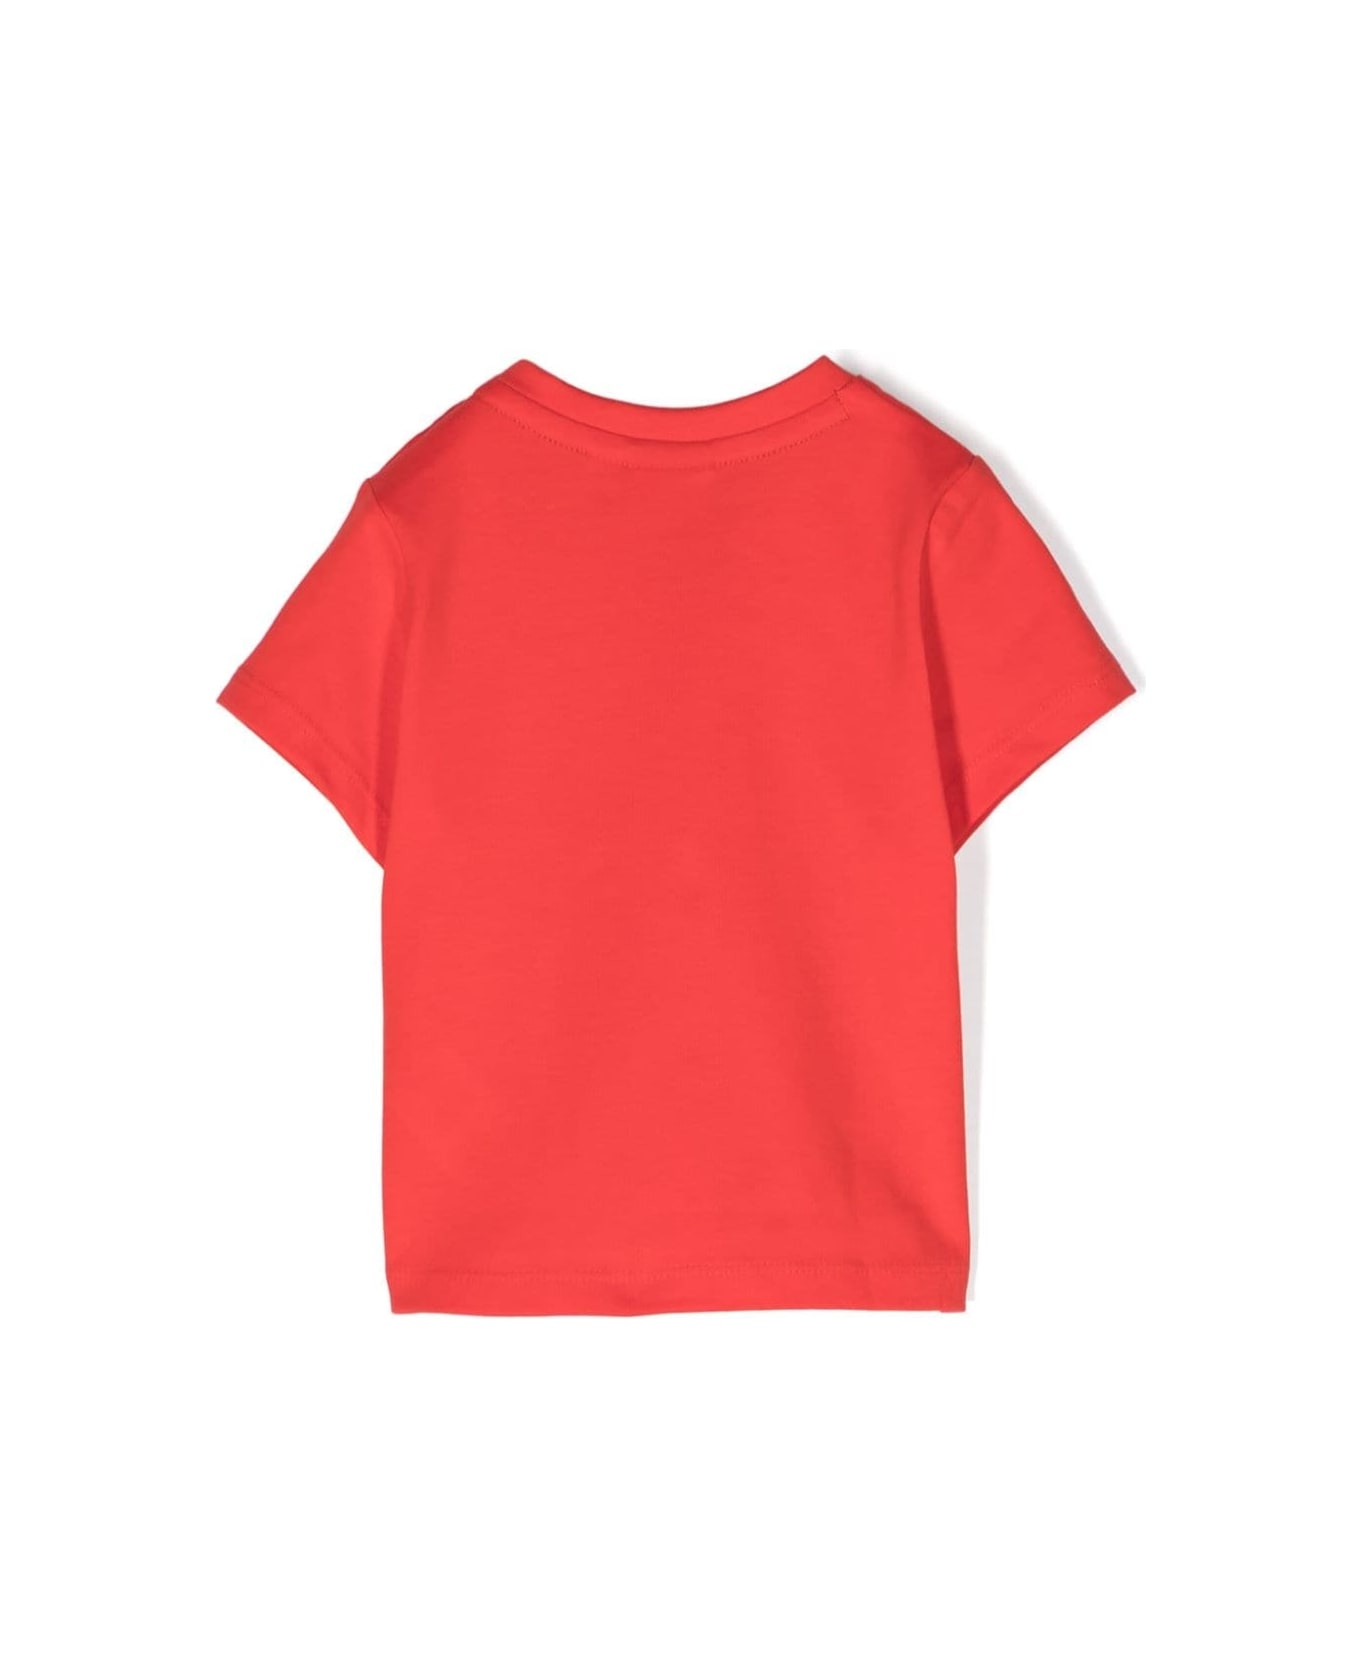 Hugo Boss T-shirt With Print - Red Tシャツ＆ポロシャツ